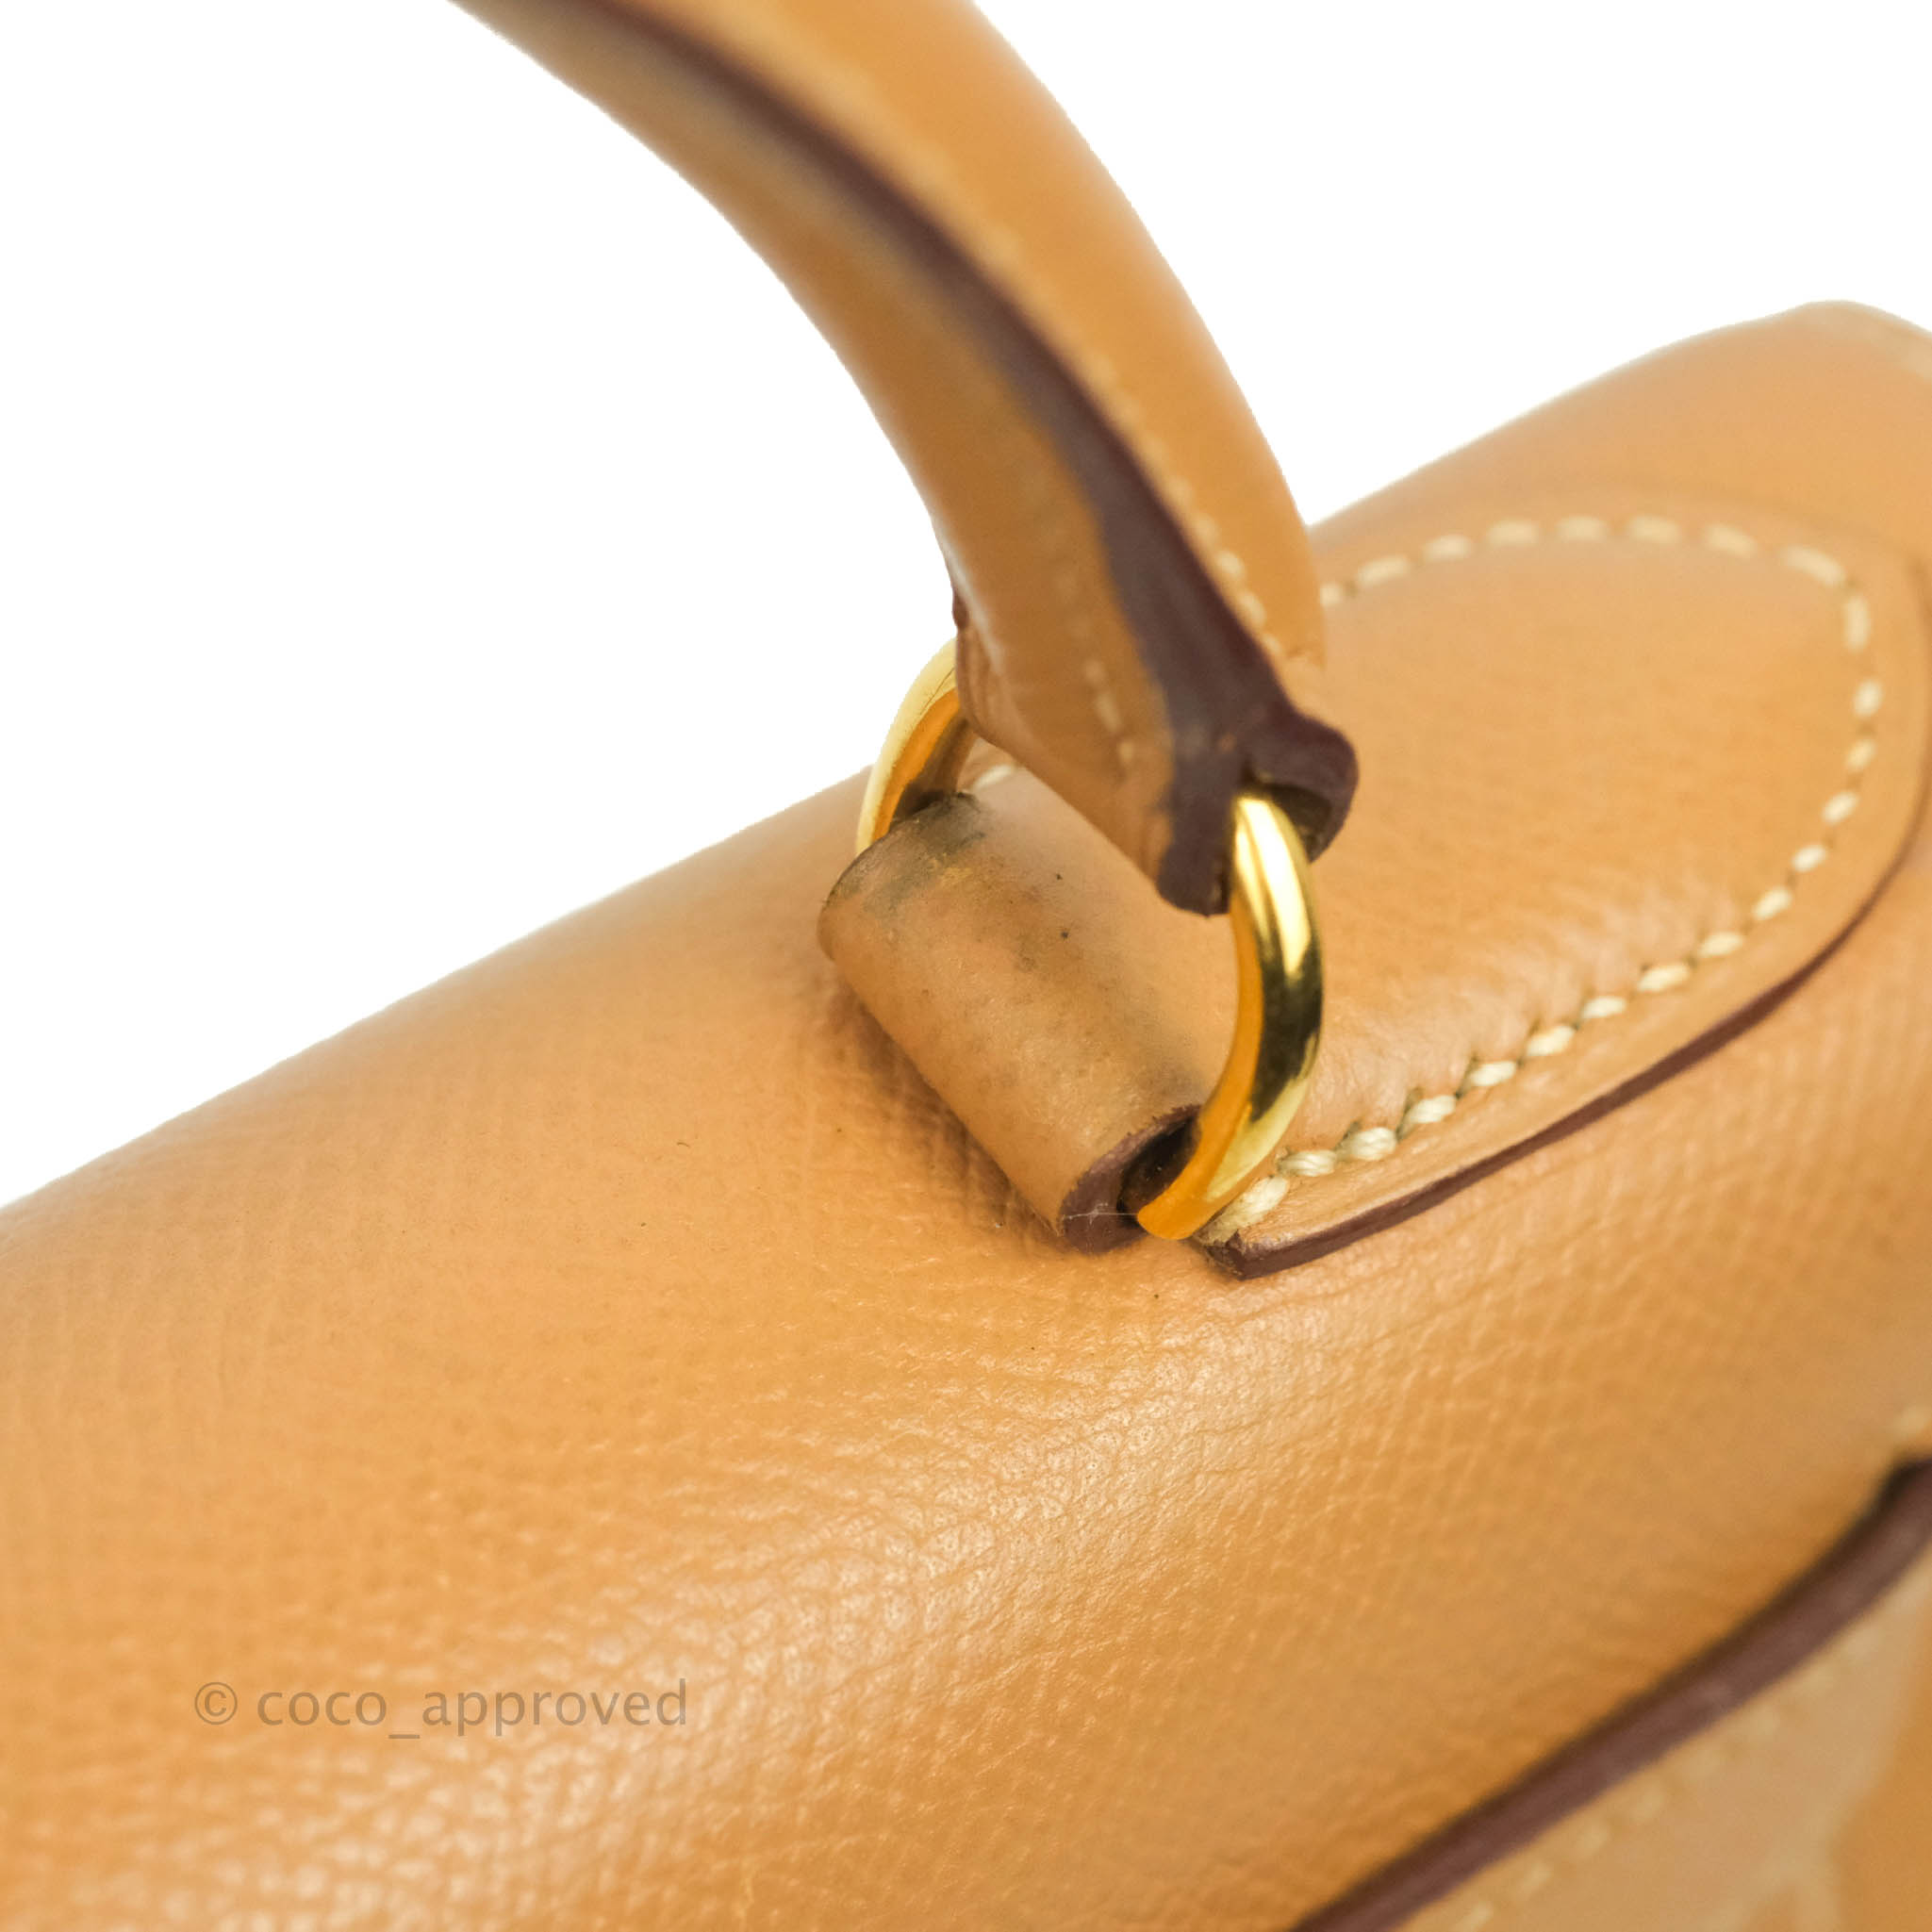 A GOLD COURCHEVEL SELLIER KELLY 28 BAG WITH GOLD HARDWARE, HERMÈS, 1994